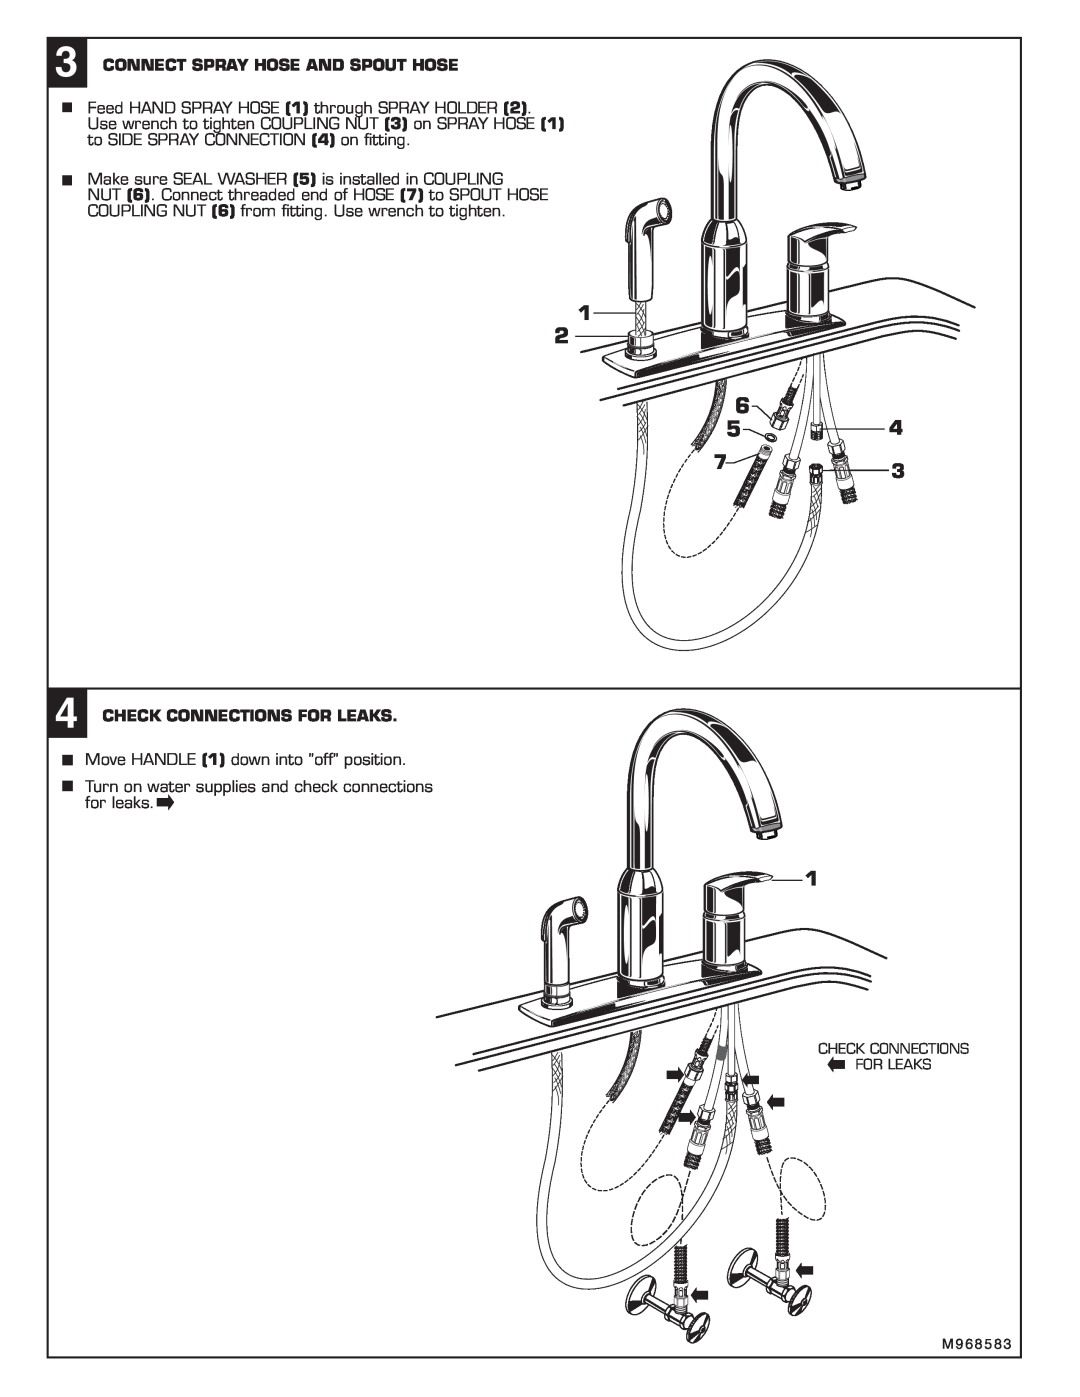 American Standard 4101.301 installation instructions Connect Spray Hose And Spout Hose, Check Connections For Leaks 